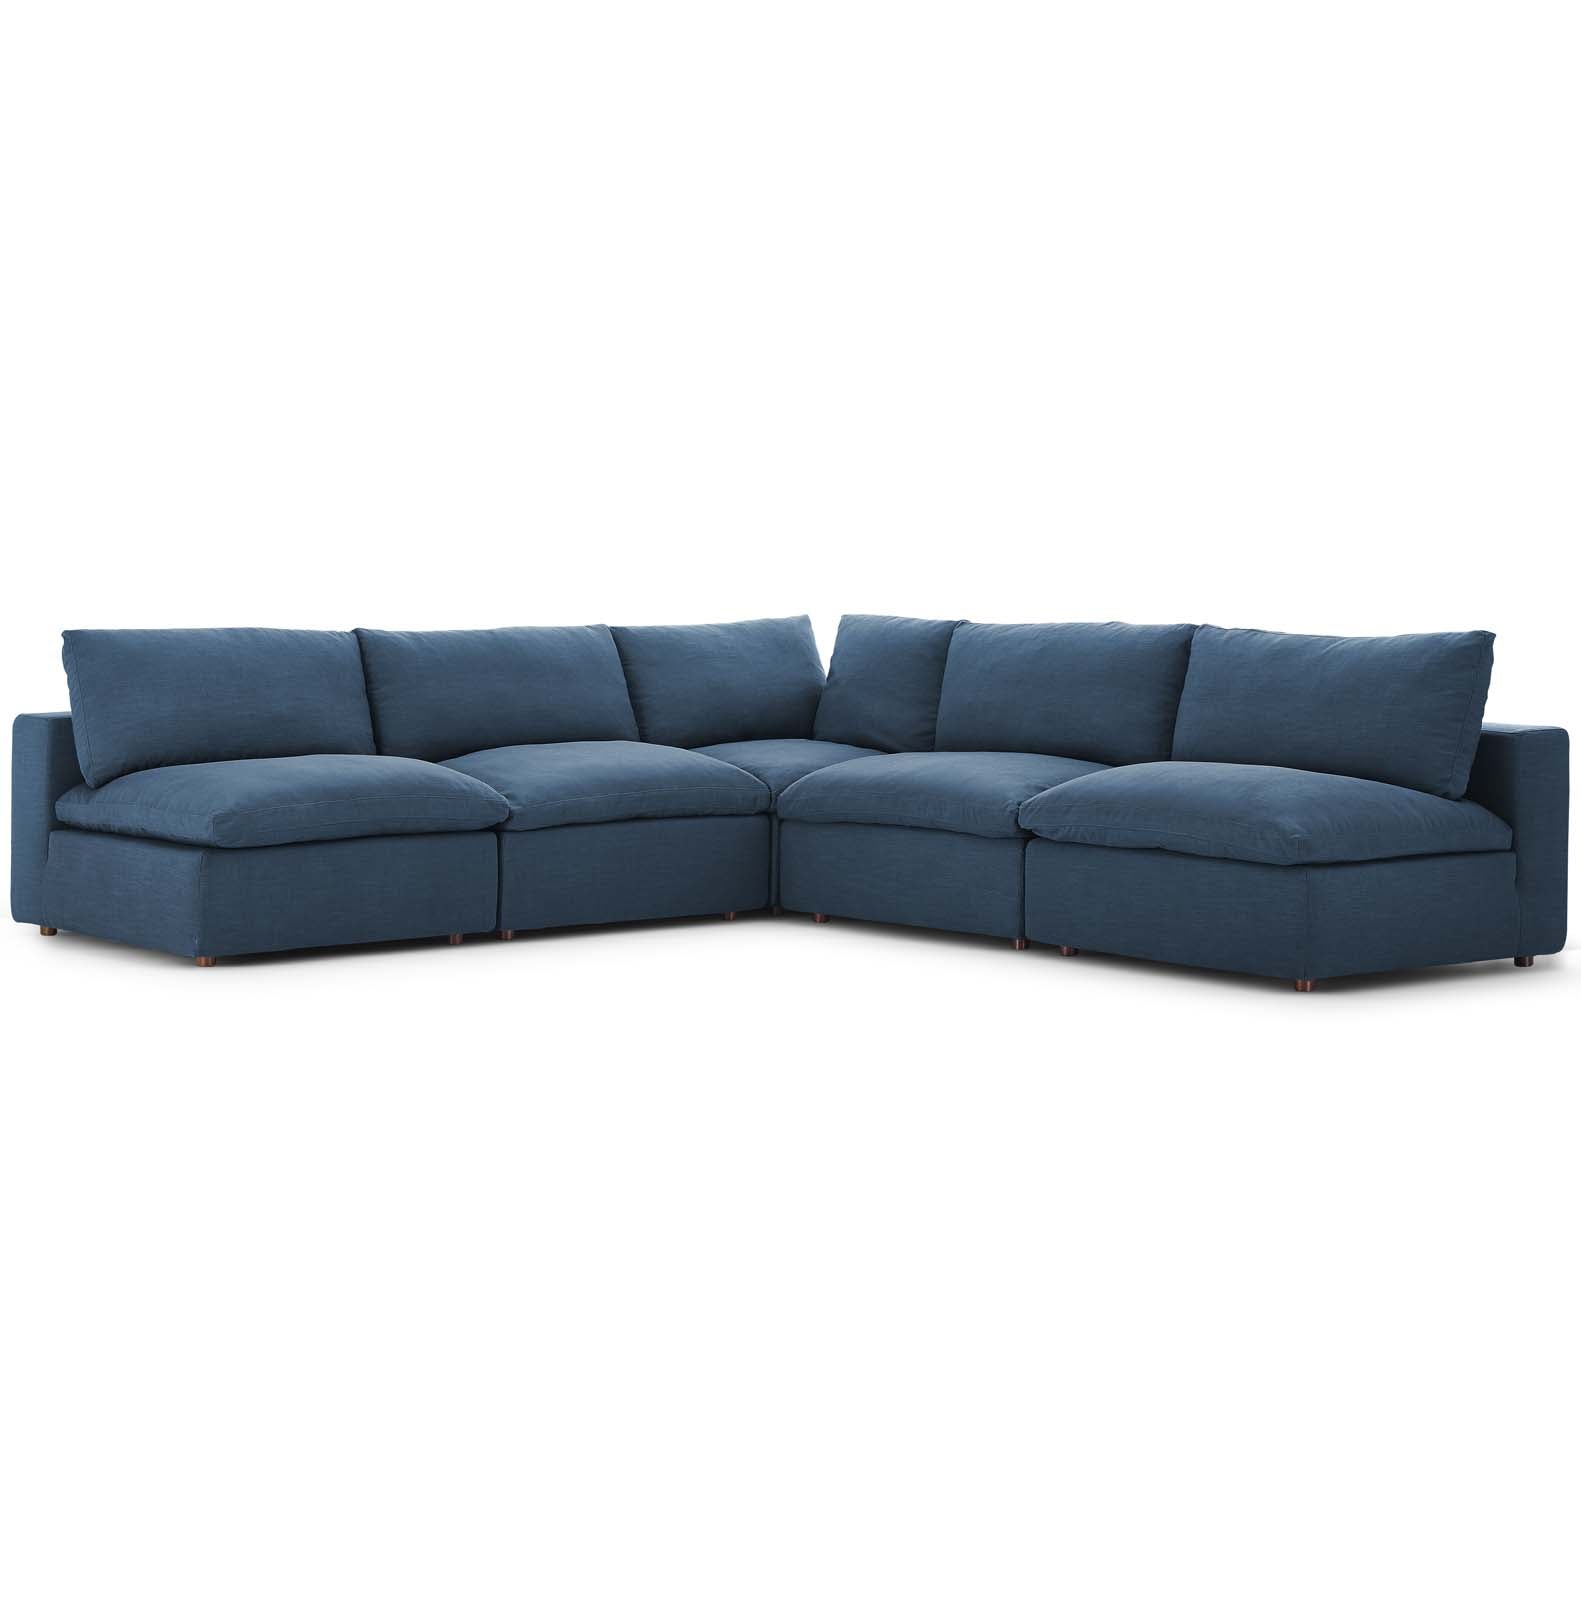 Commix Down Filled Overstuffed 5 Piece Sectional Sofa Set - East Shore Modern Home Furnishings